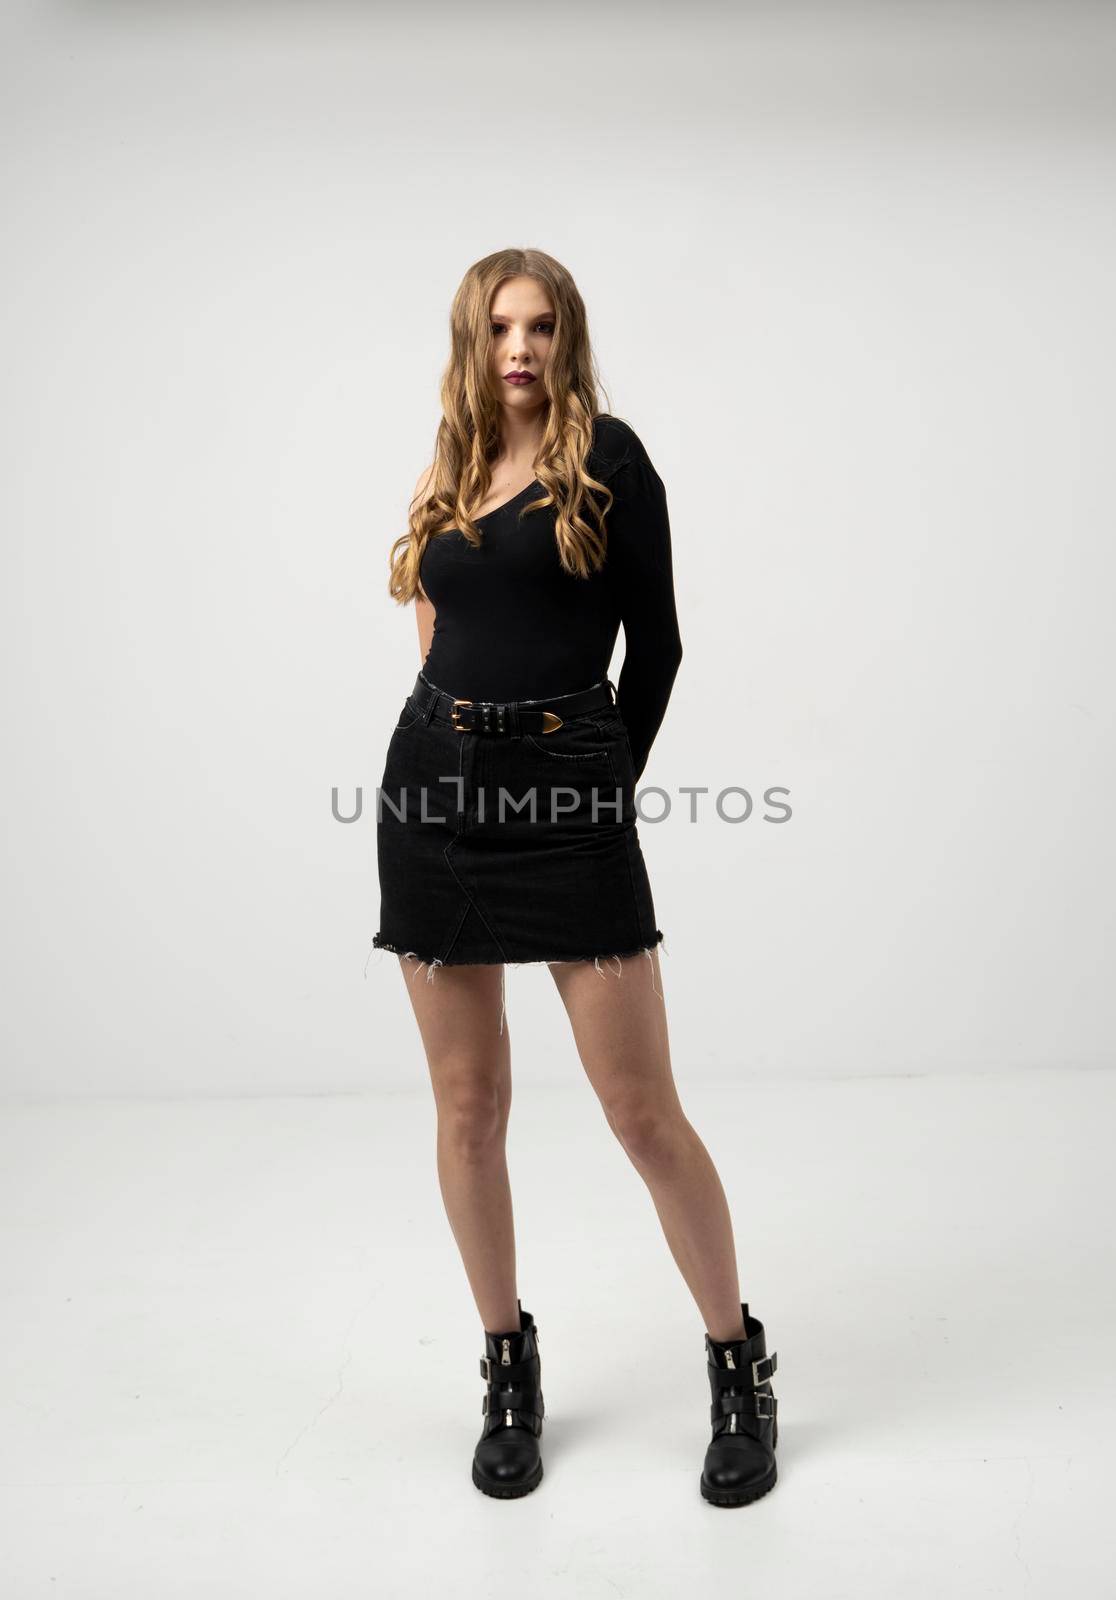 Beautiful young woman portrait in a black t-shirt and mini skirt. Studio shot, isolated on gray background